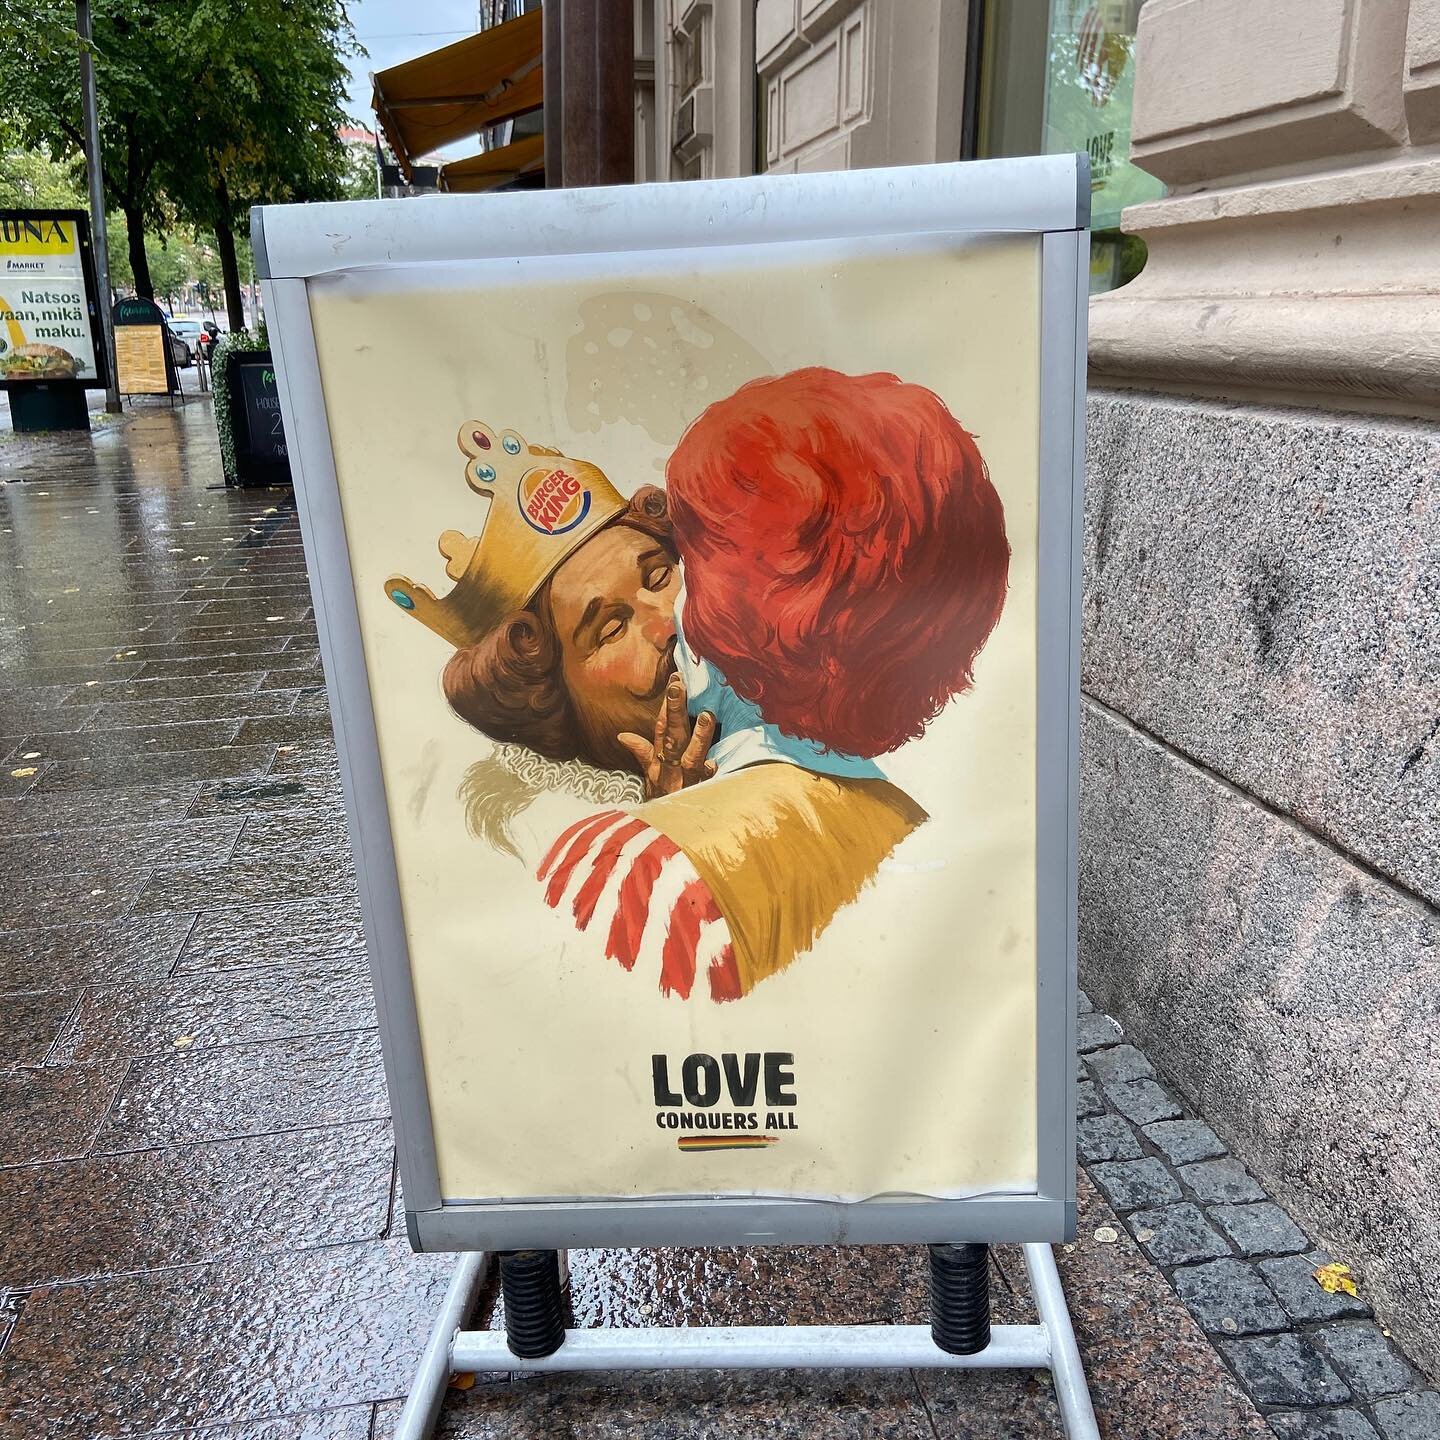 I&rsquo;m not usually a fan of fast food but I&rsquo;ll give this one to them. Love conquers. Love is love. #burguerking @helsinkipride @helsinkiprideyhteiso #pride #helsinkipride #lgbt #loveislove #sateenkaari #sateenkaariperhe #queer #gay #lesbian 